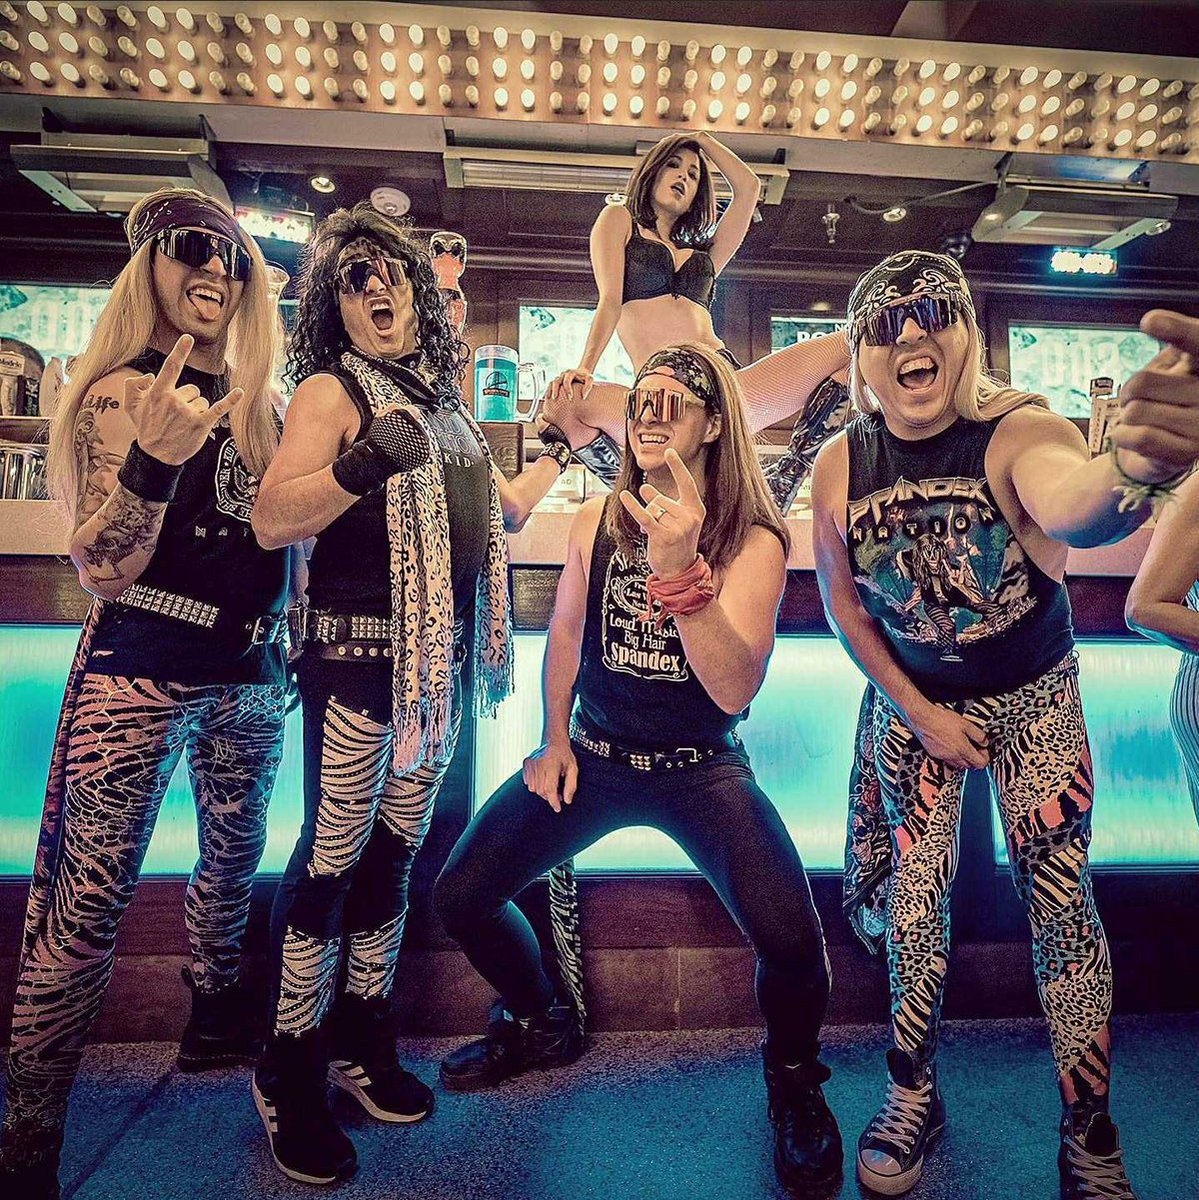 #LightsCameraFremont Catch the 80's vibes when @SpandexNationLV is on Fremont Street Experience. 📷: lott_hughes_photography (IG)